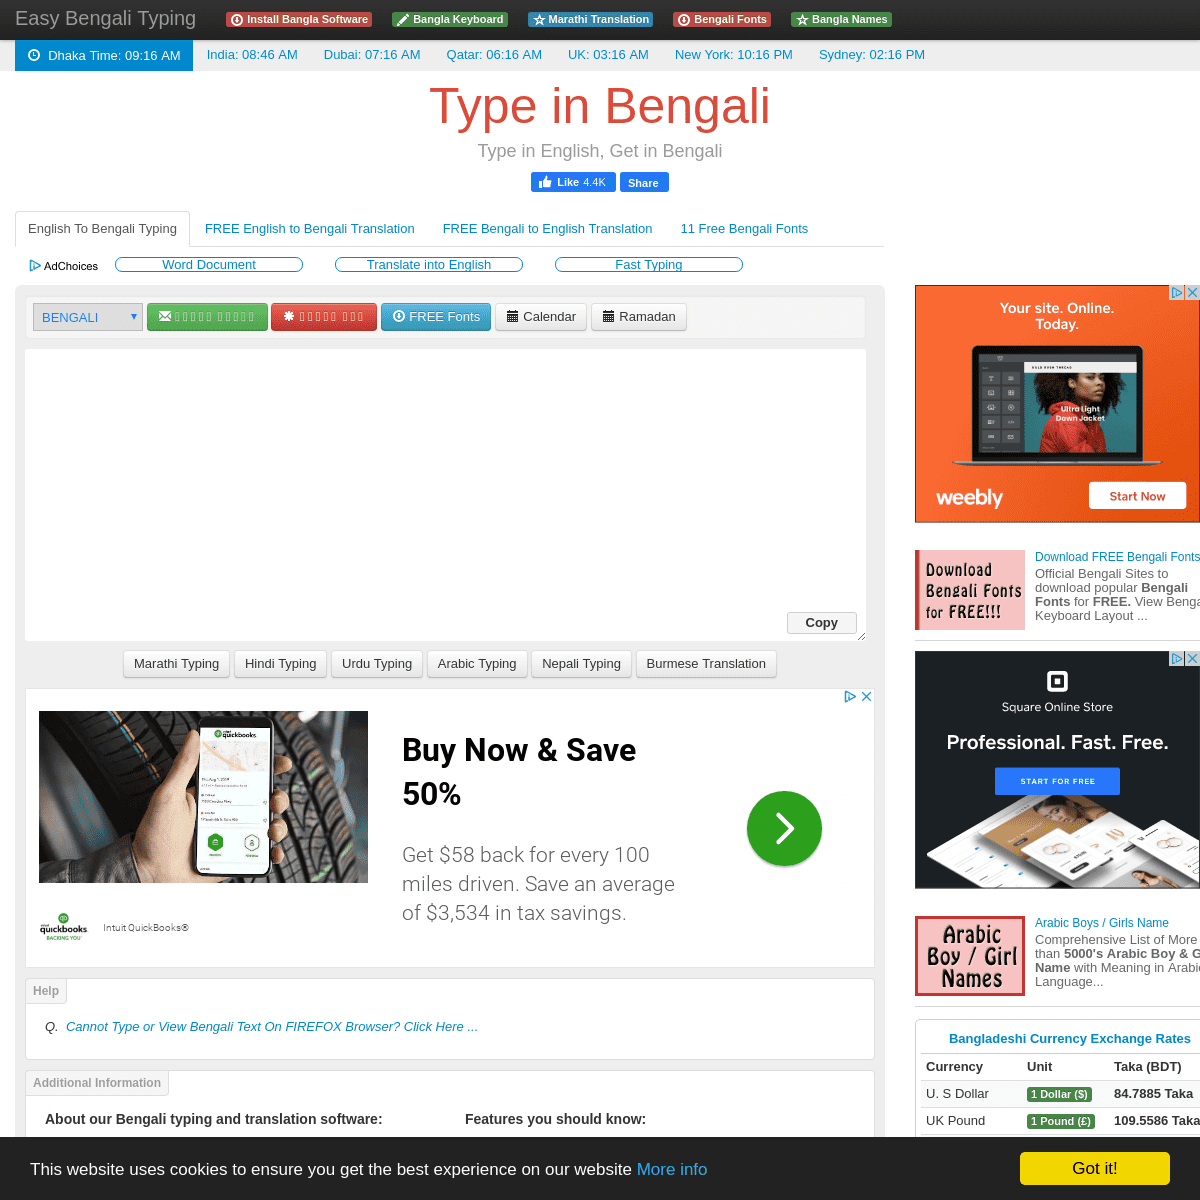 A complete backup of easybengalityping.com